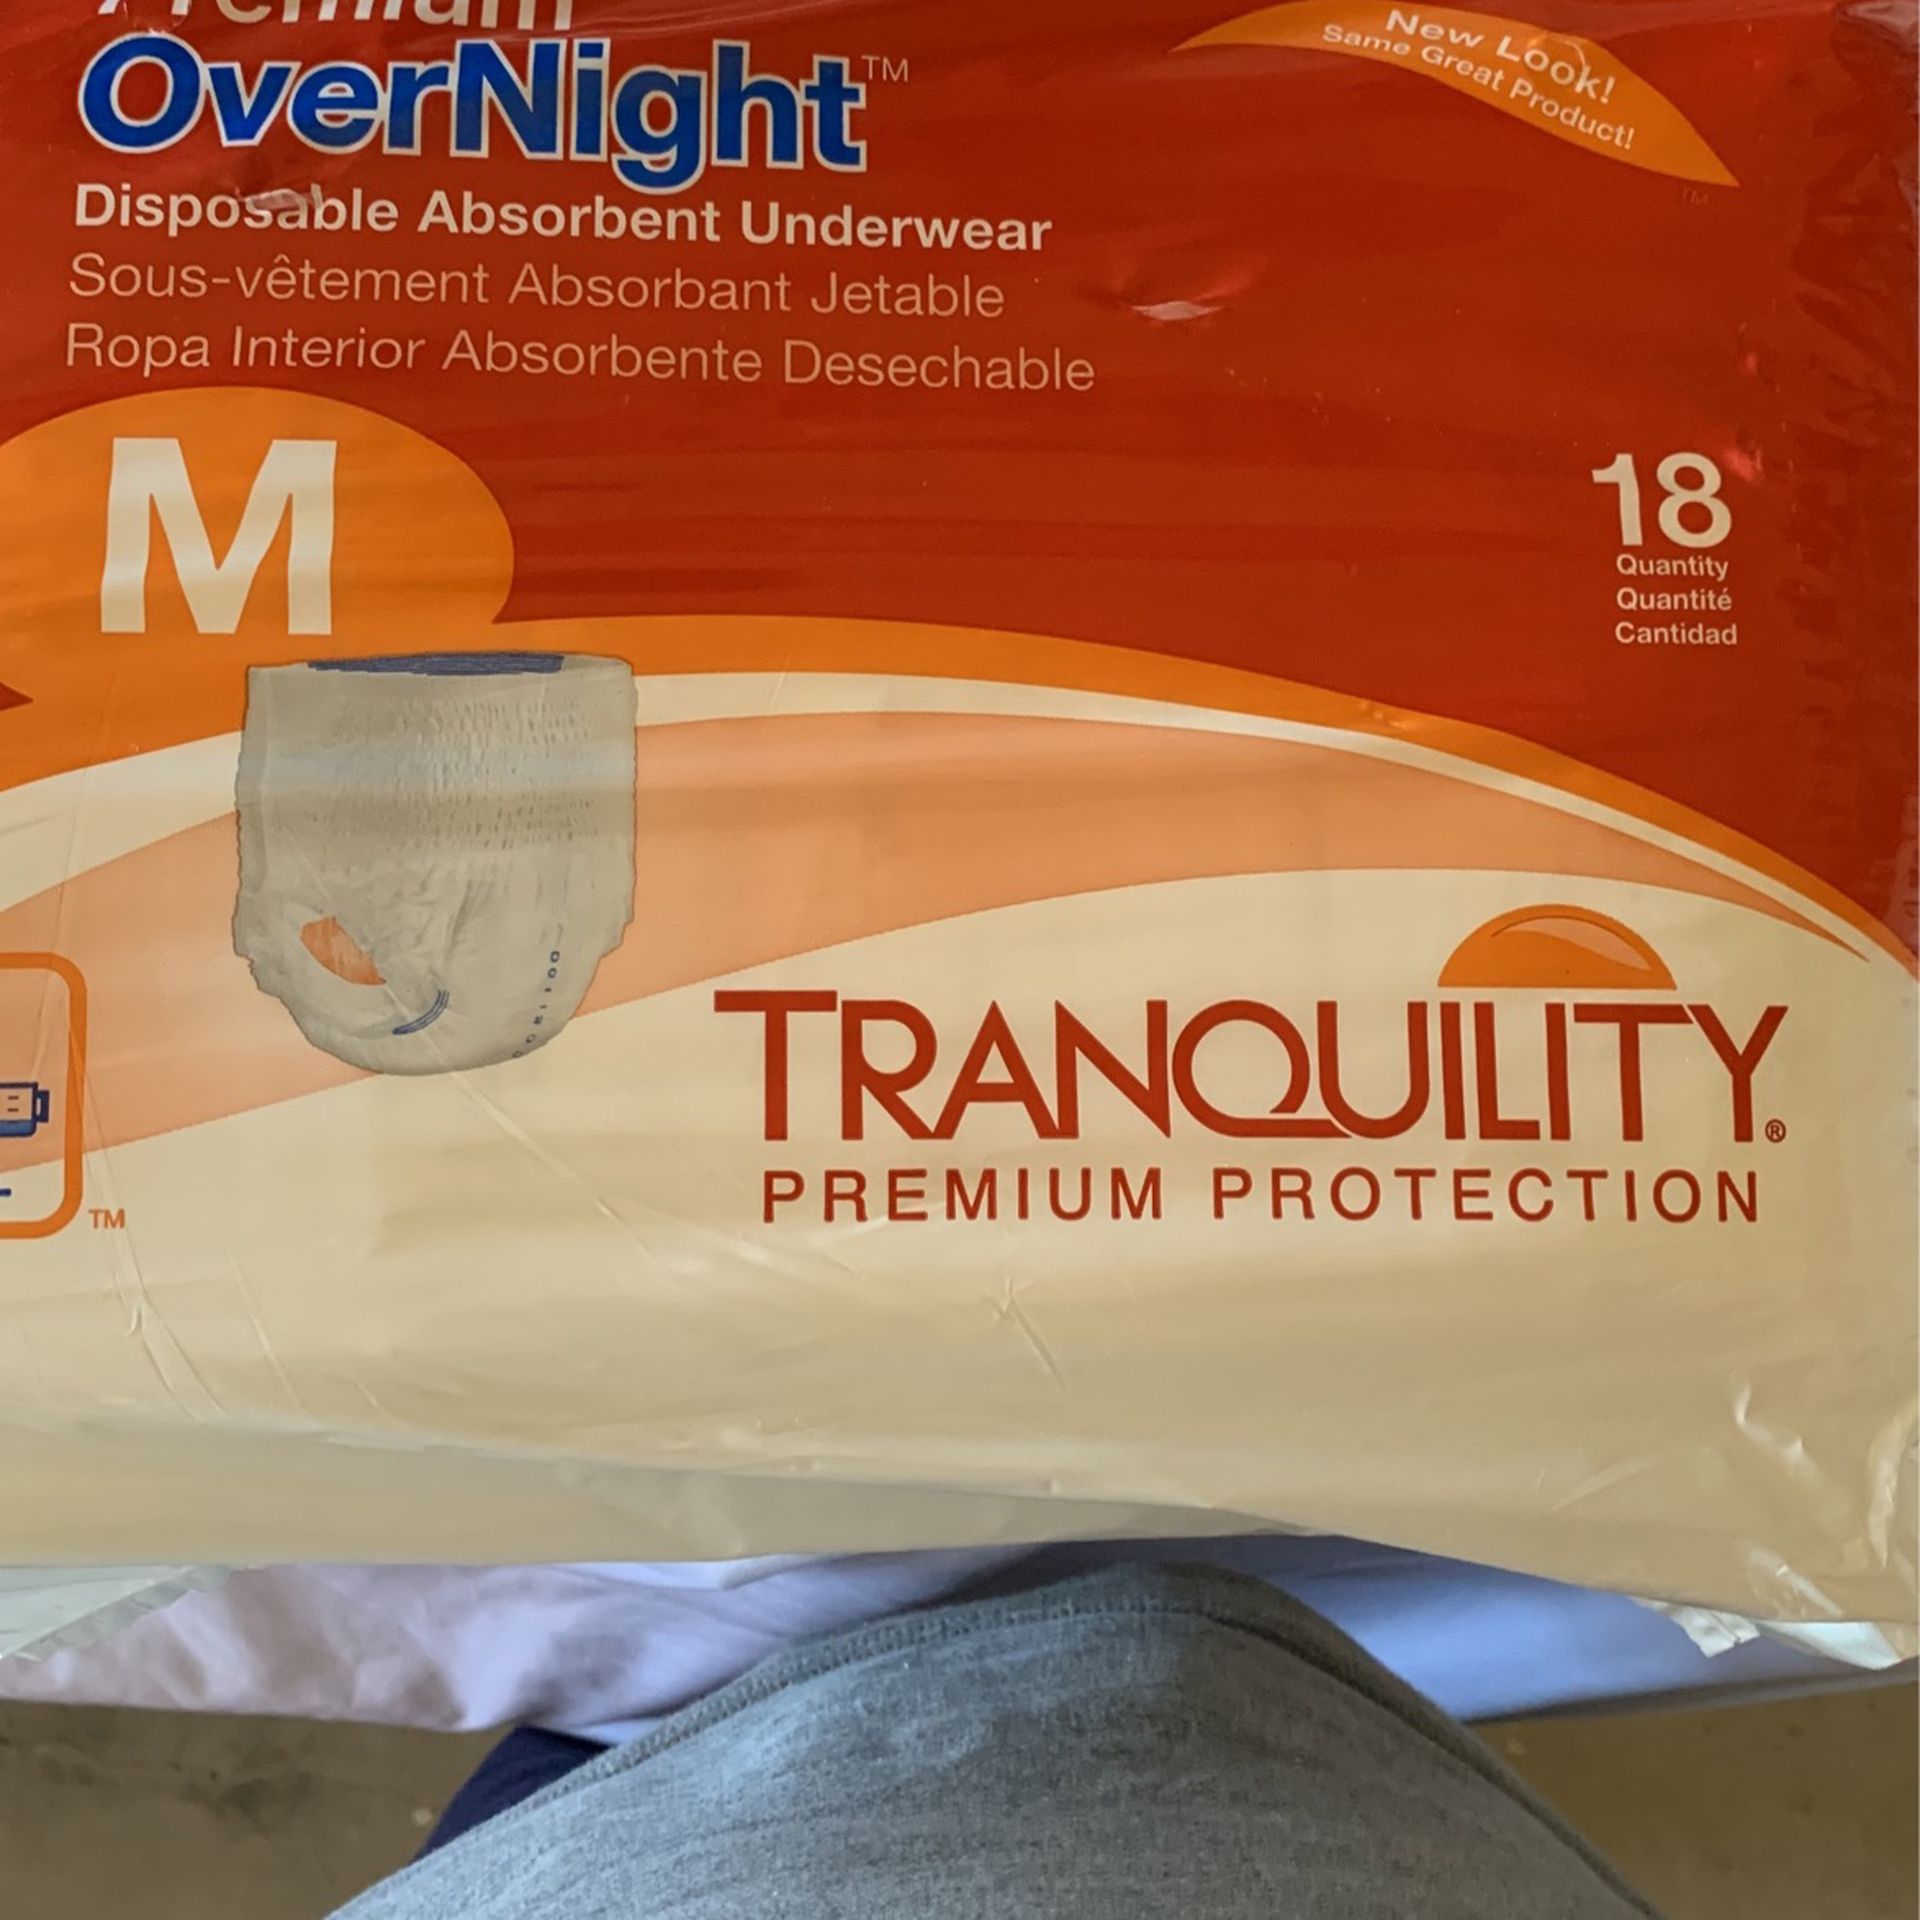 TRANQUILITY Premium Protection